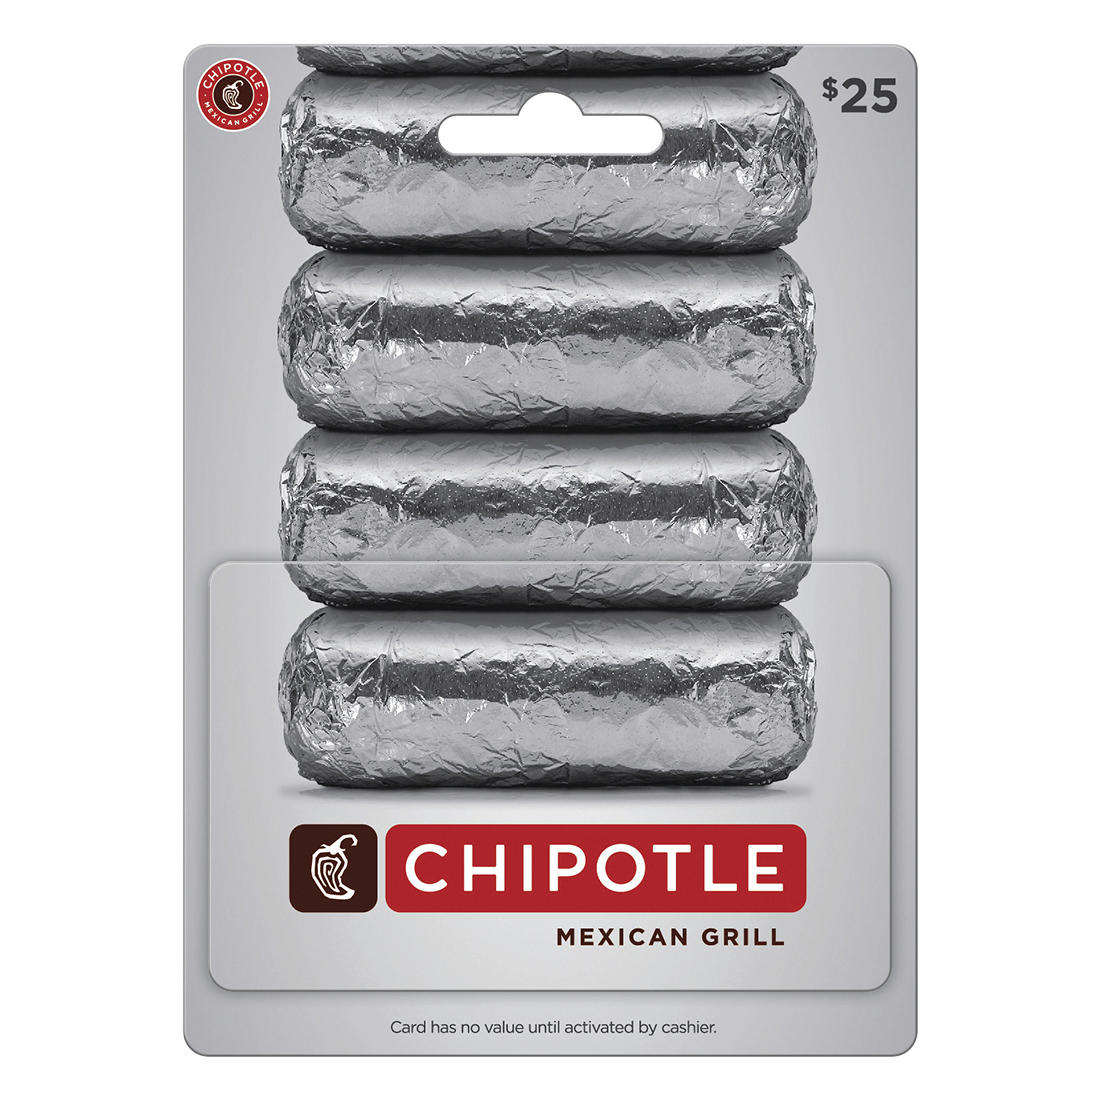 BJ’s $25 Chipotle Mexican Grill Gift Card - $19.99